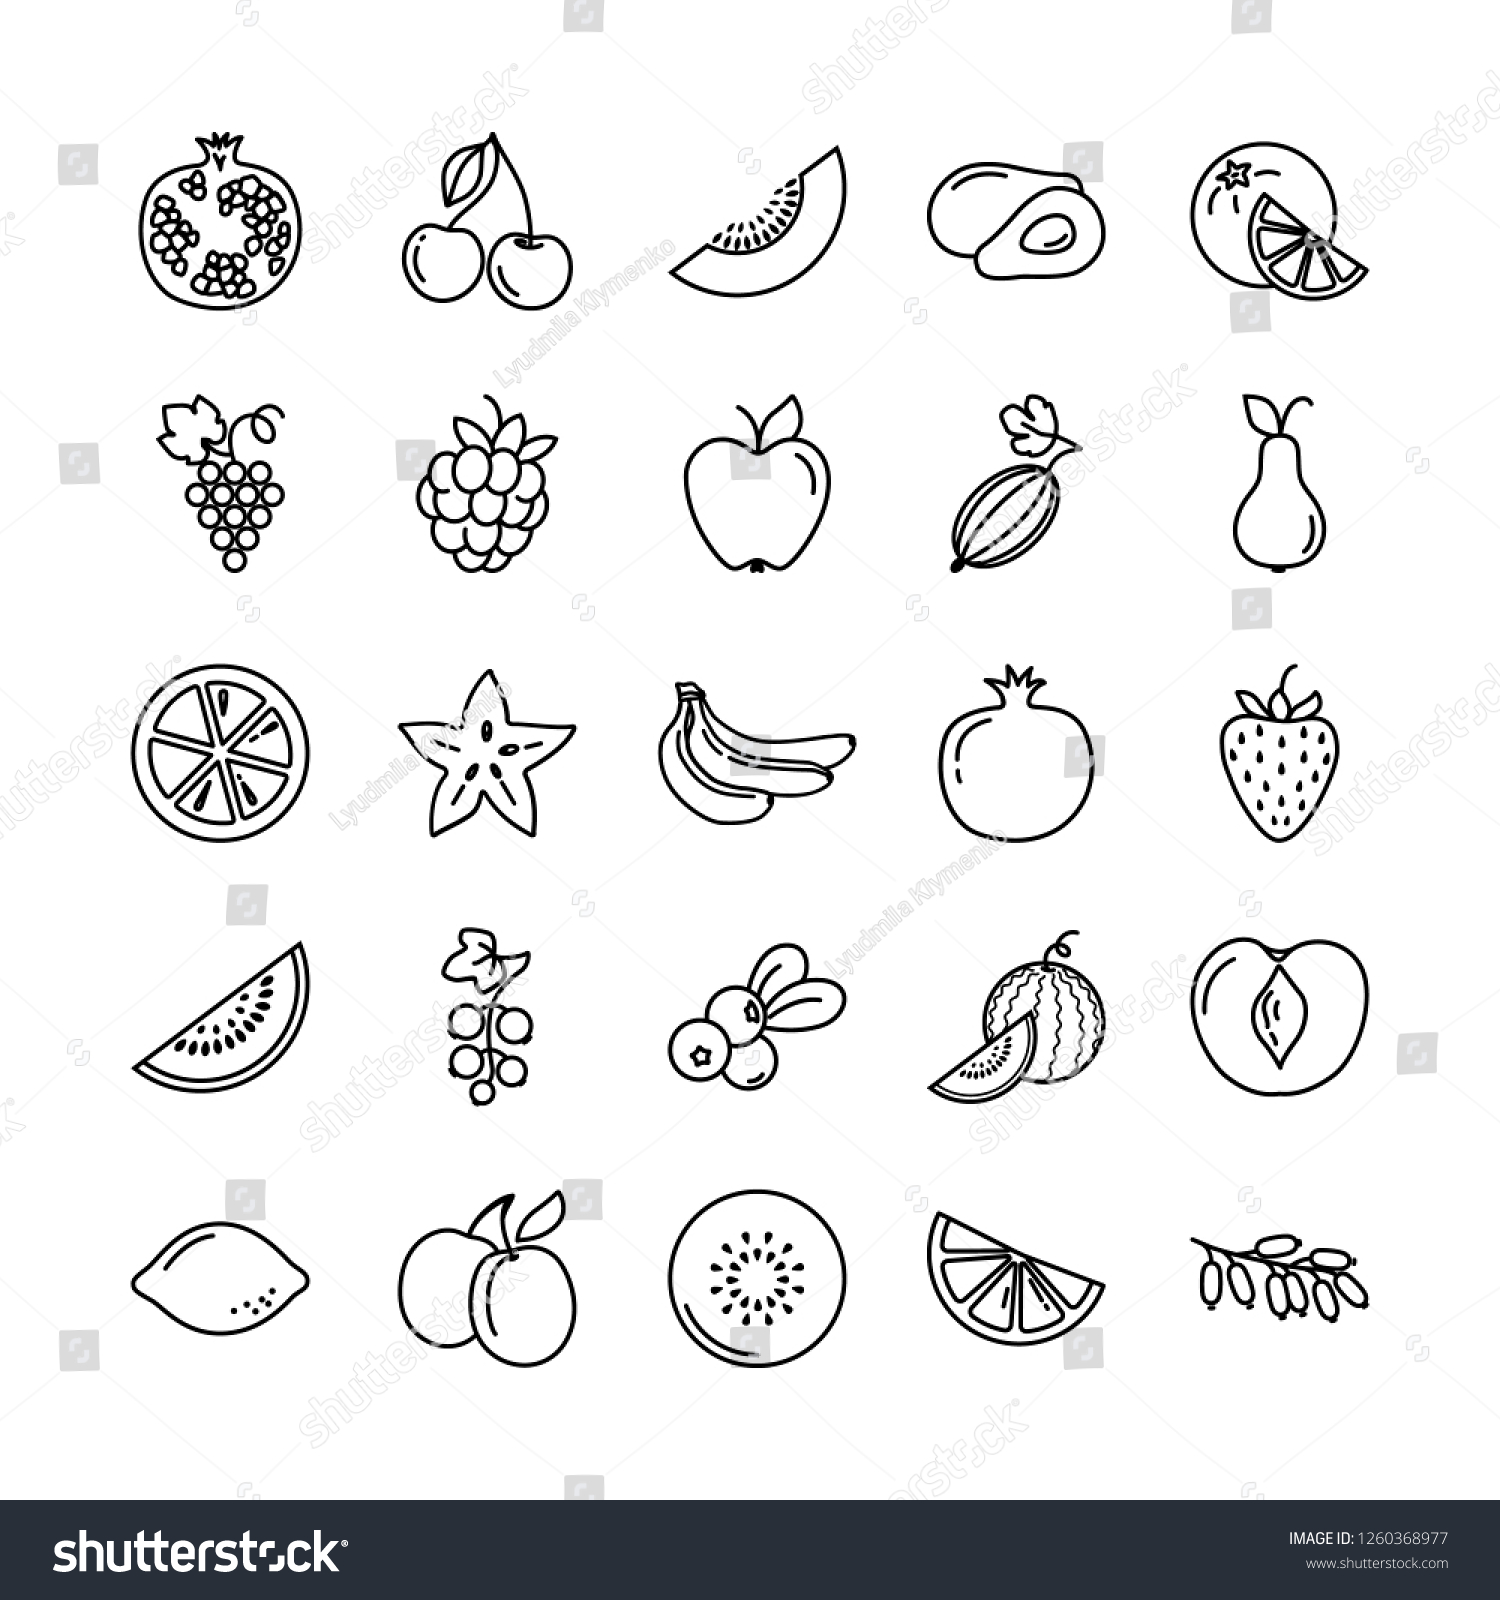 Set of fruits icons illustration background in isolated vector. Perfectly suitable for revision or use for printing in books, publishing on websites. #1260368977